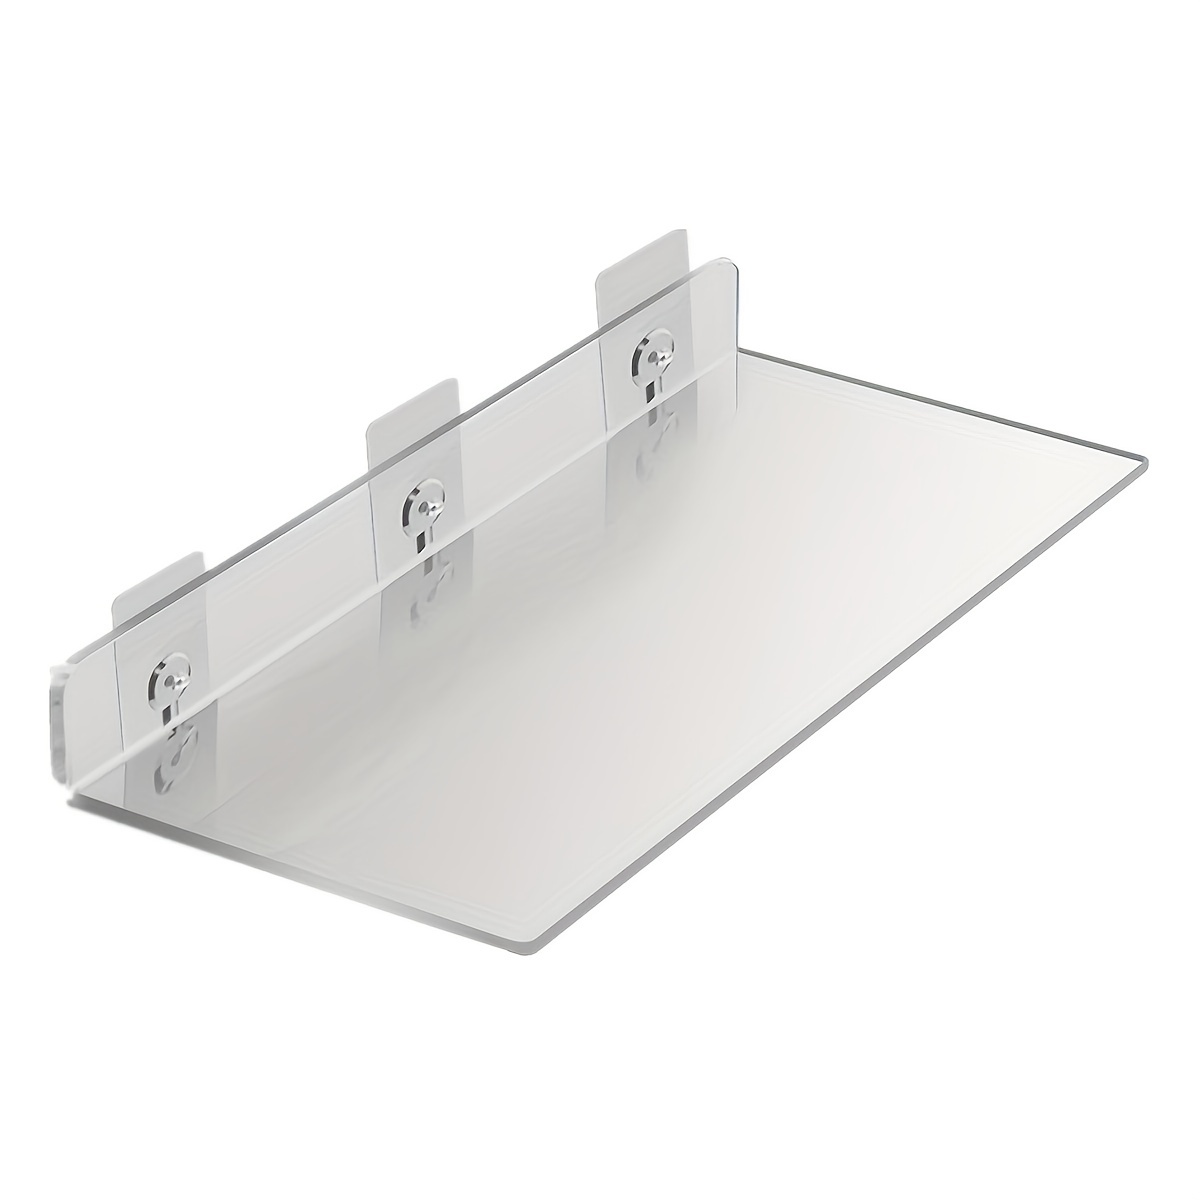 Clear Acrylic Wall Shelves,Small Floating Adhesive Shelf That Can Be  Installed in Bathroom, Living Room, Kitchen, Shower Room,Used to  Display,Organize